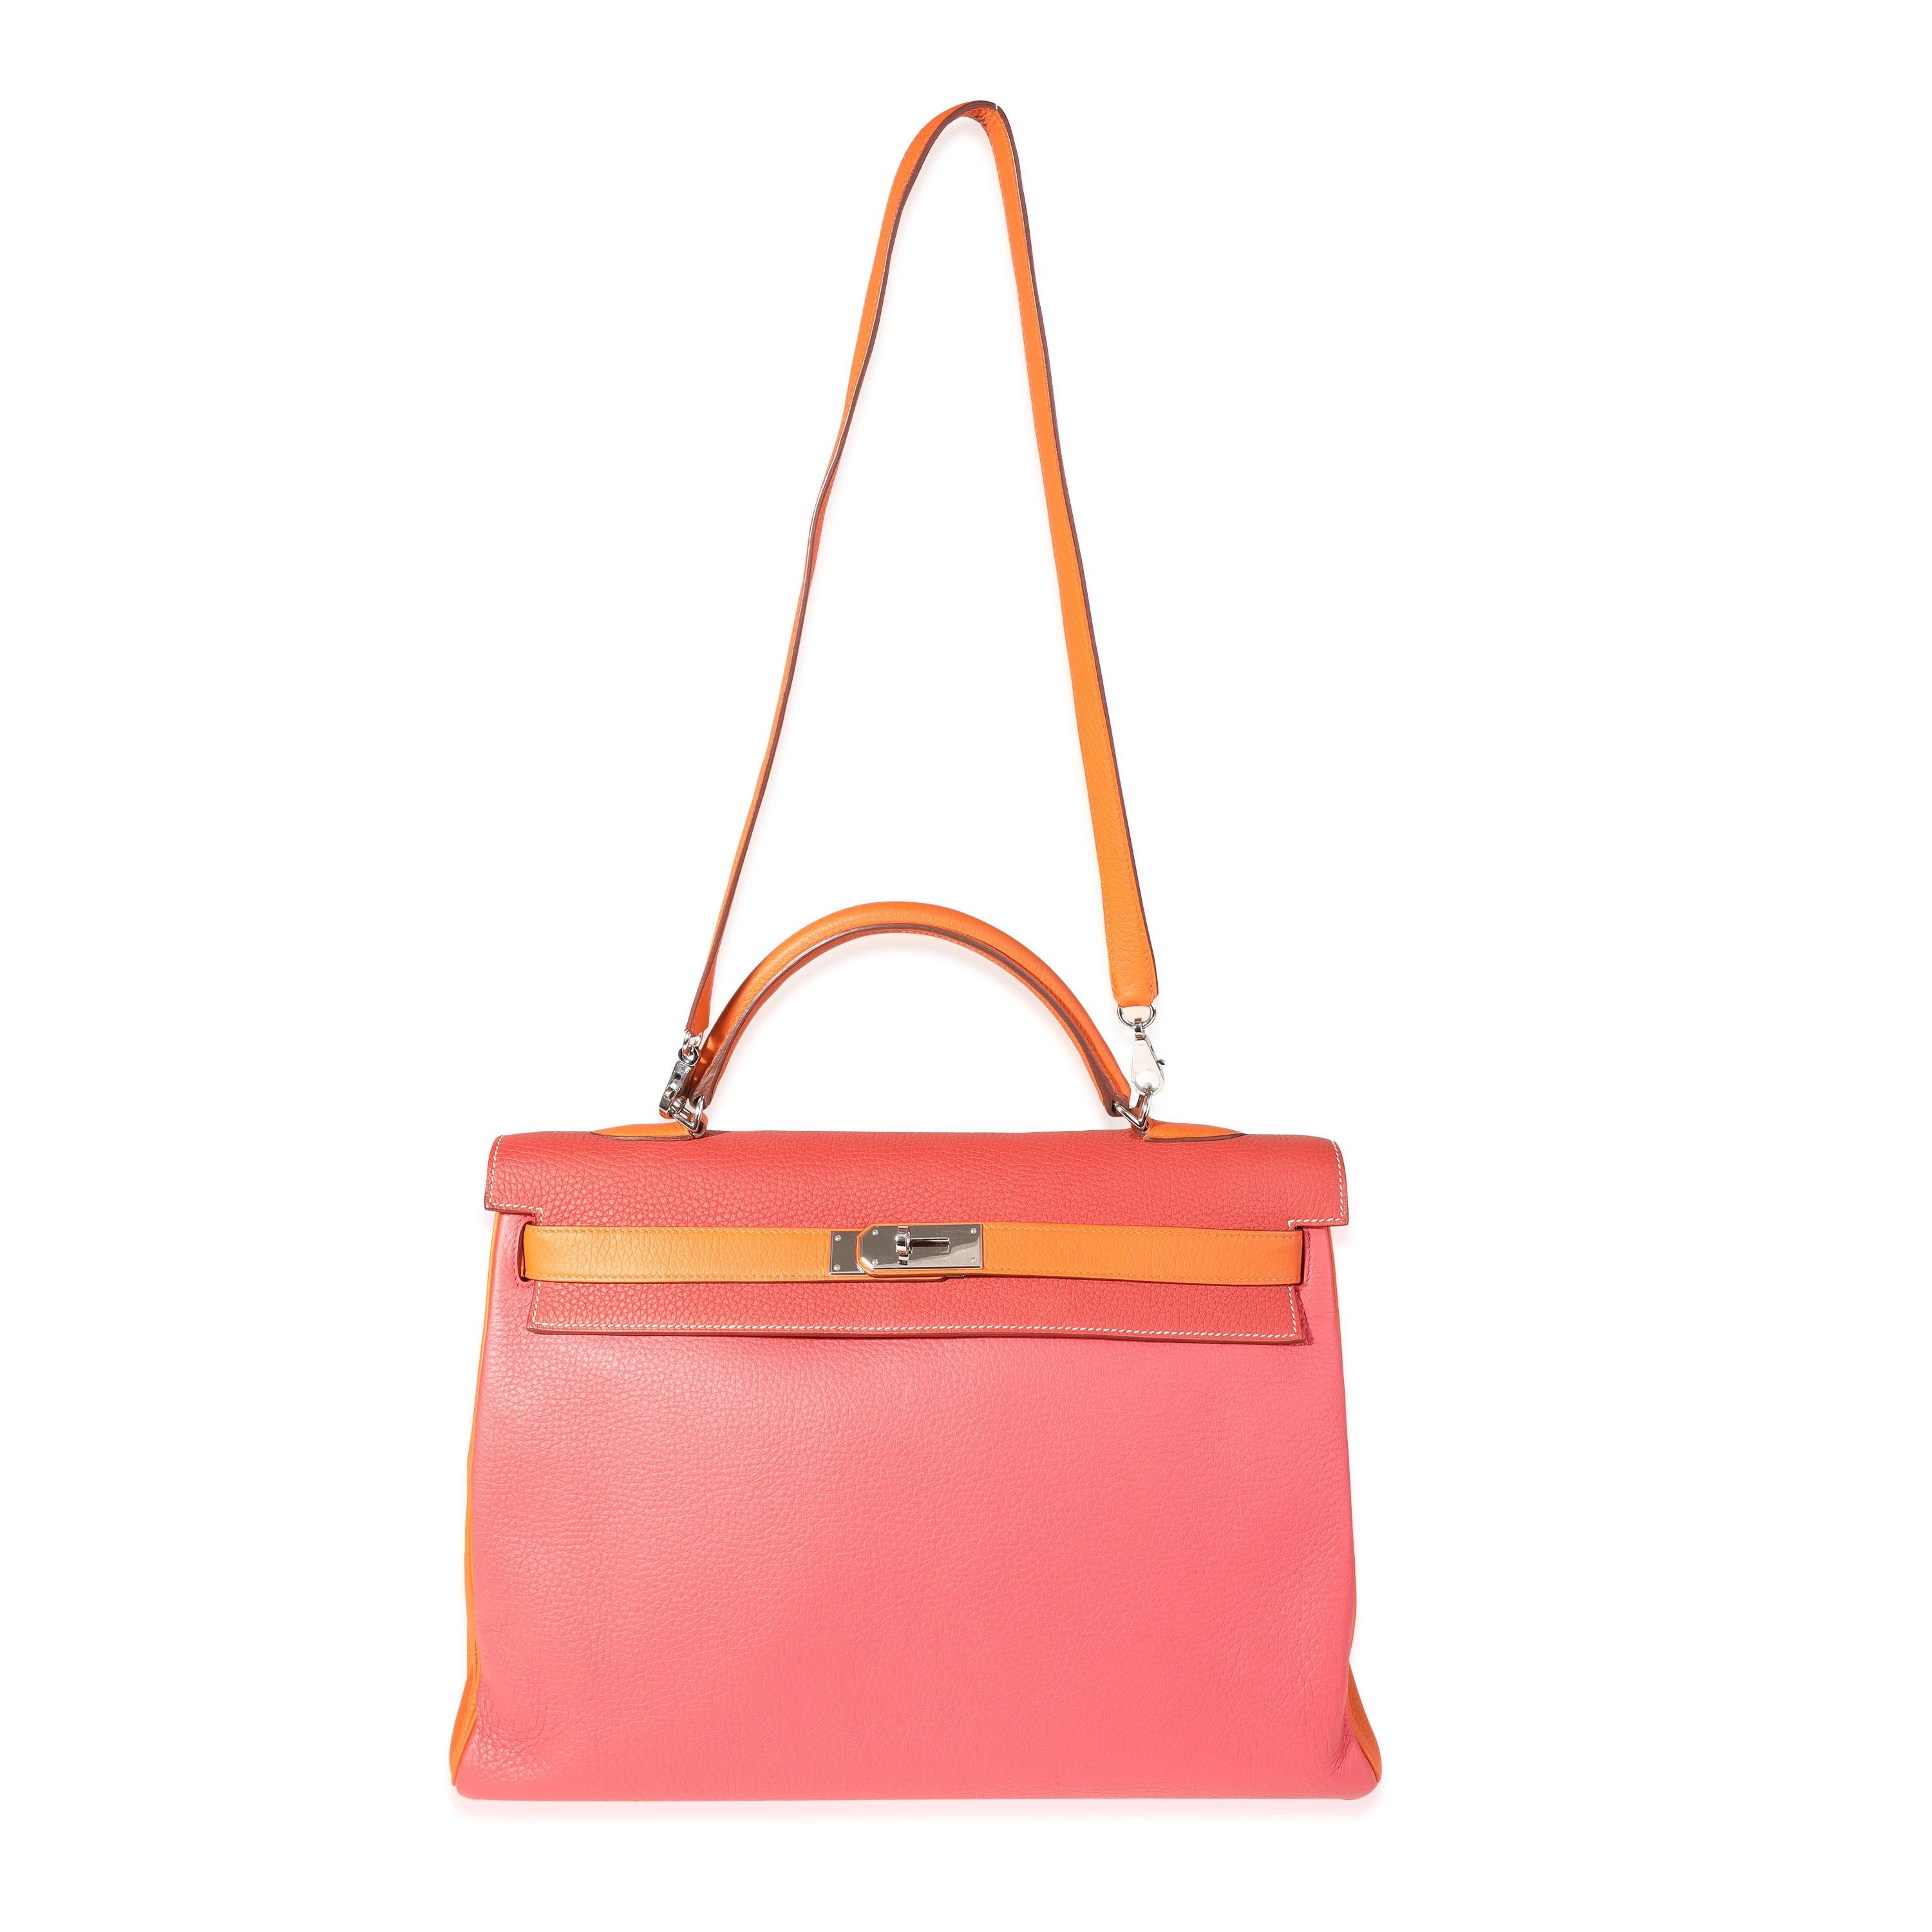 Listing Title: Hermès Rose Jaipur, Sanguine, & Orange Clèmence Retourne Kelly 40 PHW
SKU: 119006

Handbag Condition: Very Good
Condition Comments: Wear to corners and bottom. Scratches on hardware and feet. Clean interior. Missing lock, key,